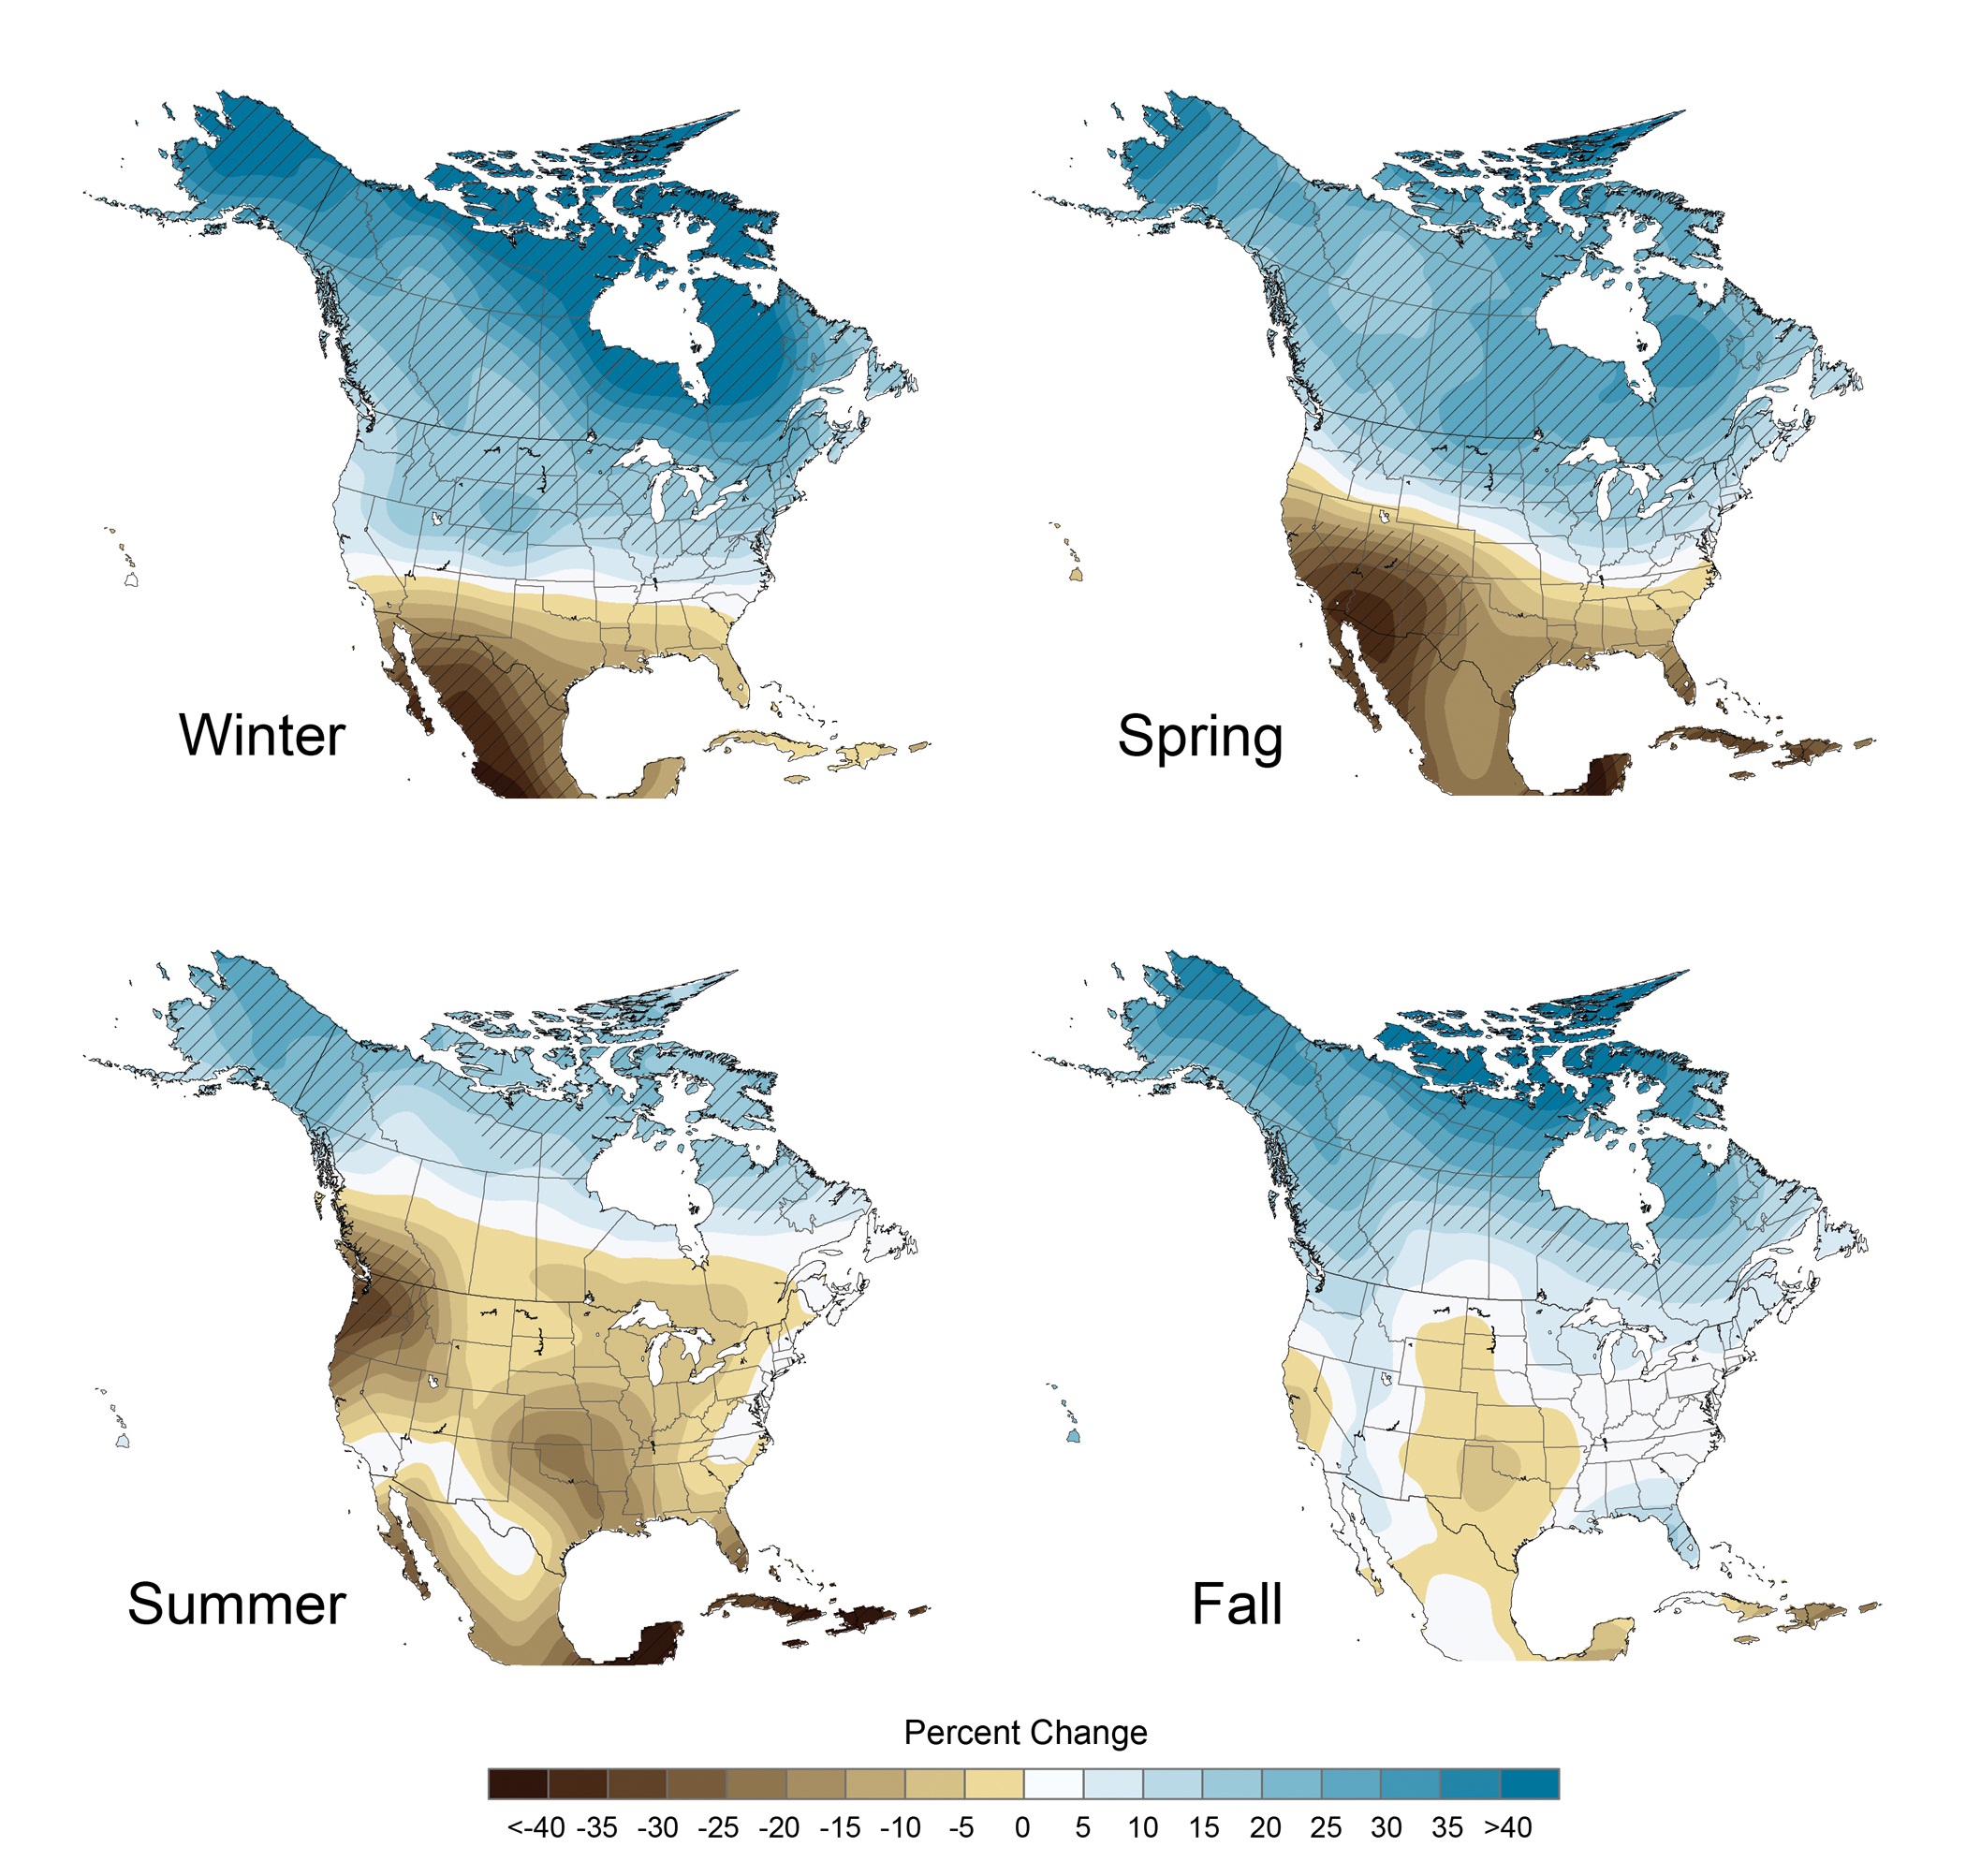 Series of four maps of the United States - one for each season. The maps are shaded on a scale of dark brown that represents up to a forty percent decline in precipitation and dark blue that represents up to a forty percent increase in precipitation. In general, the maps for all four seasons are brown in the south and blue in the north. The winter map shows a decrease in precipitation for southern states and varying levels of increased precipitation for states north of the most southern states (for instance, Colorado and Tennessee are projected to experience increased precipitation in the winter). The spring map shows a significant decrease in precipitation in most of the continental United States, and U.S. tropical islands. Conversely, the northern states and Alaska show projected precipitation increases in the spring. In the summer, only Alaska shows an increase in precipitation. The Northwest and Gulf Coast show the most significant precipitation declines in the summer. Projections for precipitation changes in the Fall are milder than changes in the other seasons - declines are limited to approximately 10 percent in the Fall. Alaska and a few states (the Northwest and Southeast) are projected to experience slightly (about ten to twenty percent) more precipitation in the Fall.